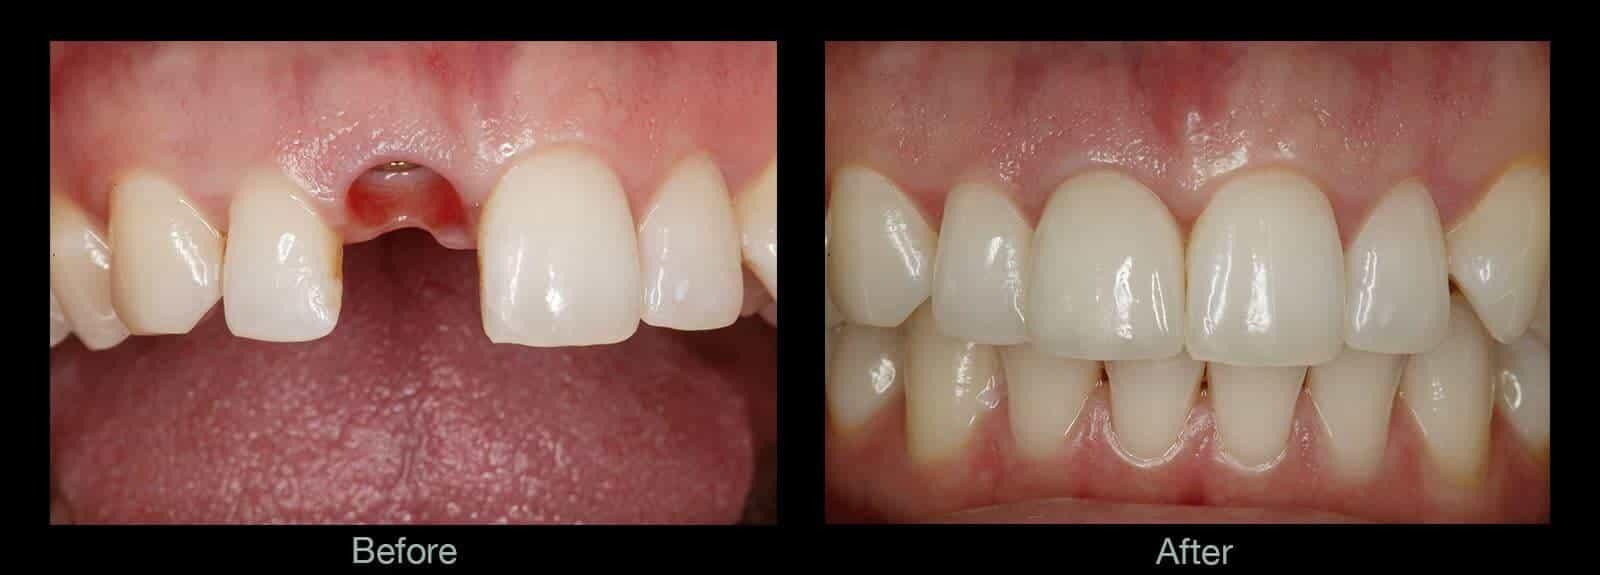 image-gambar-layanan-https://s3-ap-southeast-1.amazonaws.com/public-medicaboo/1712277567135_Dental-Implants-Before-After-Pictures.jpg